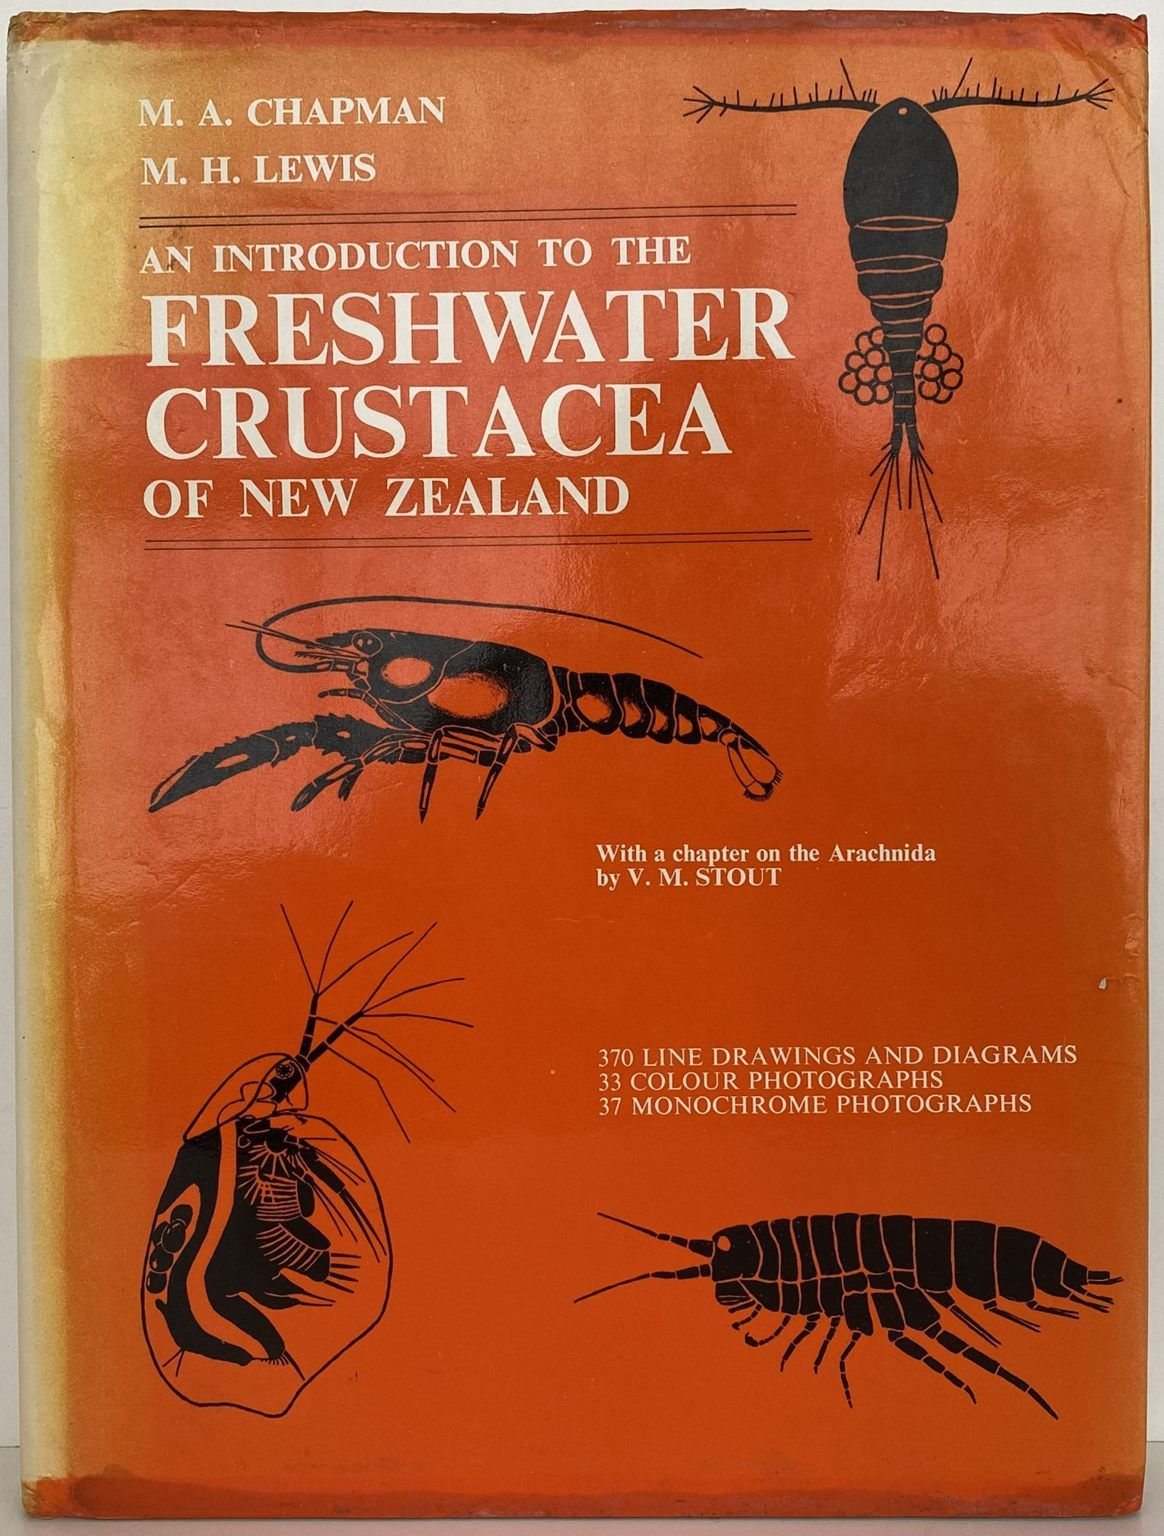 An Introduction to the FRESHWATER CRUSTACEA of New Zealand